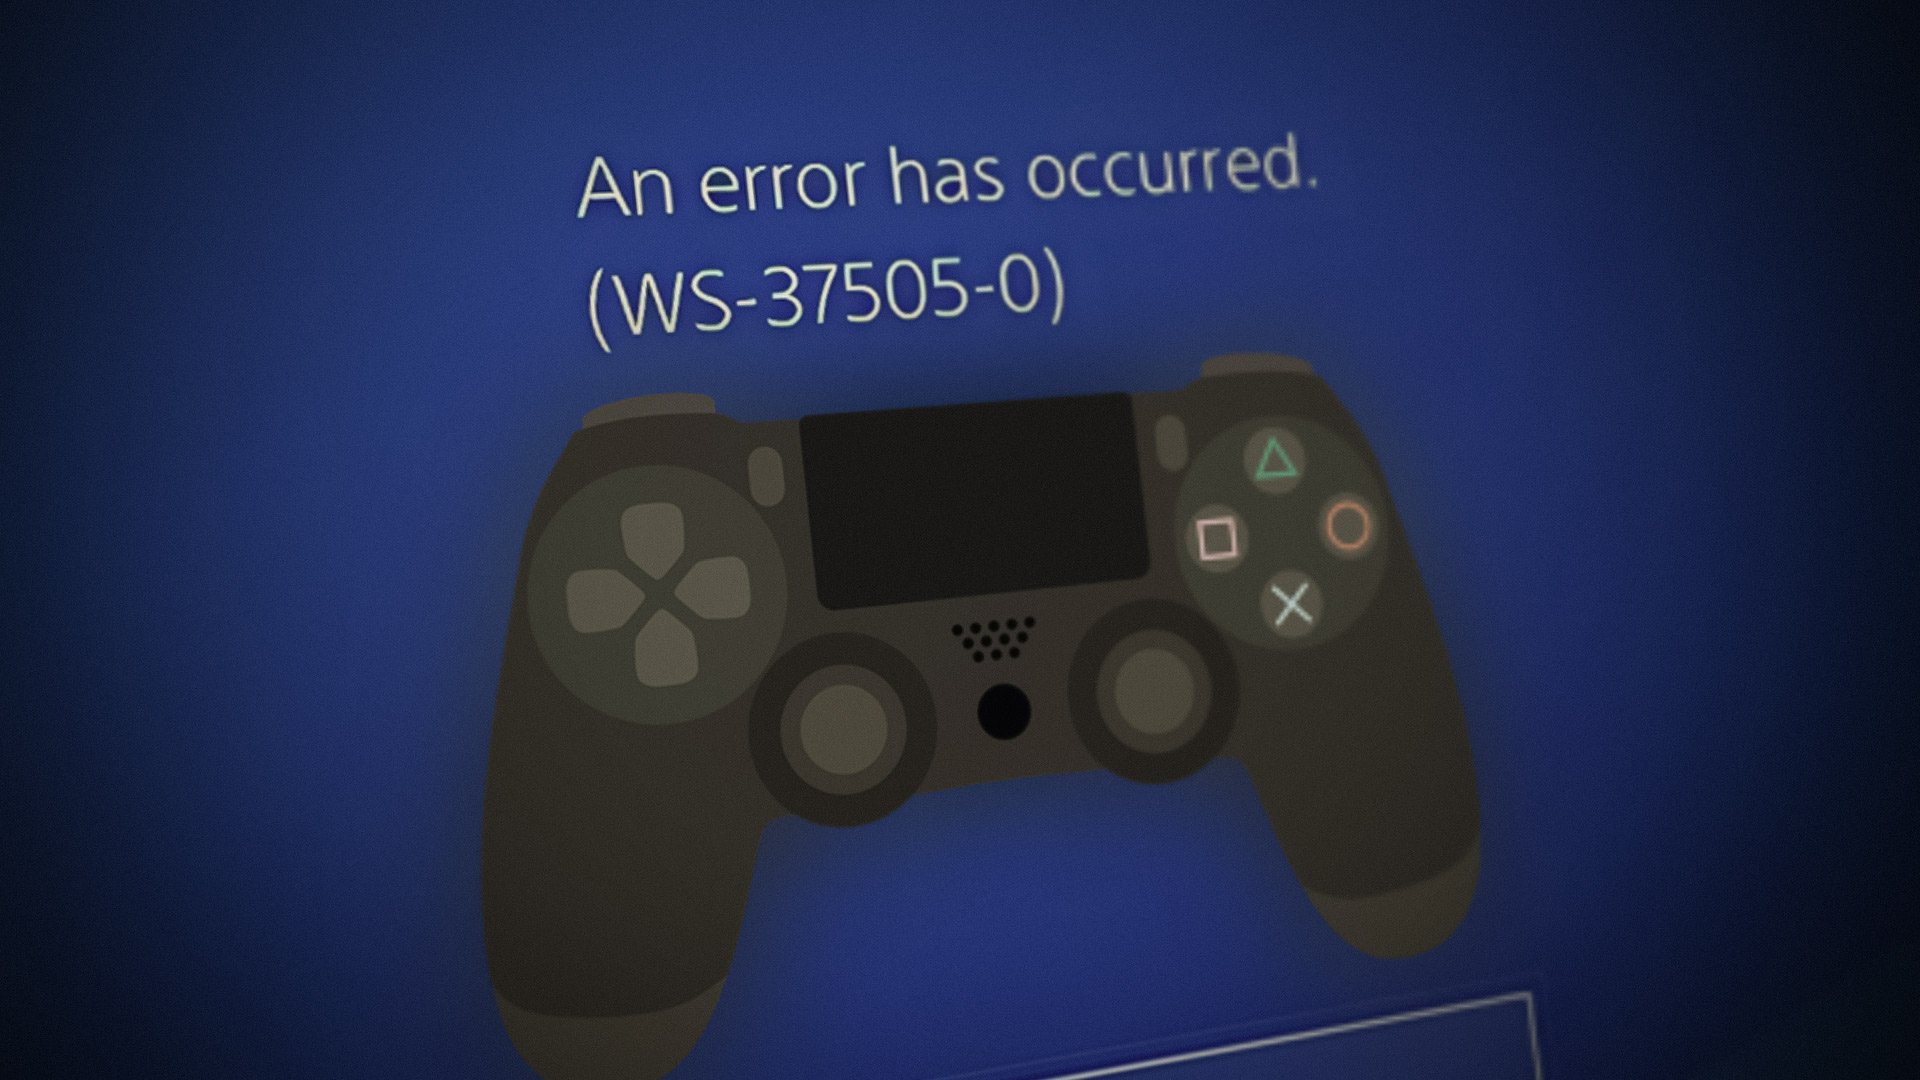 How to Fix Error Code WS-37505-0 PlayStation?